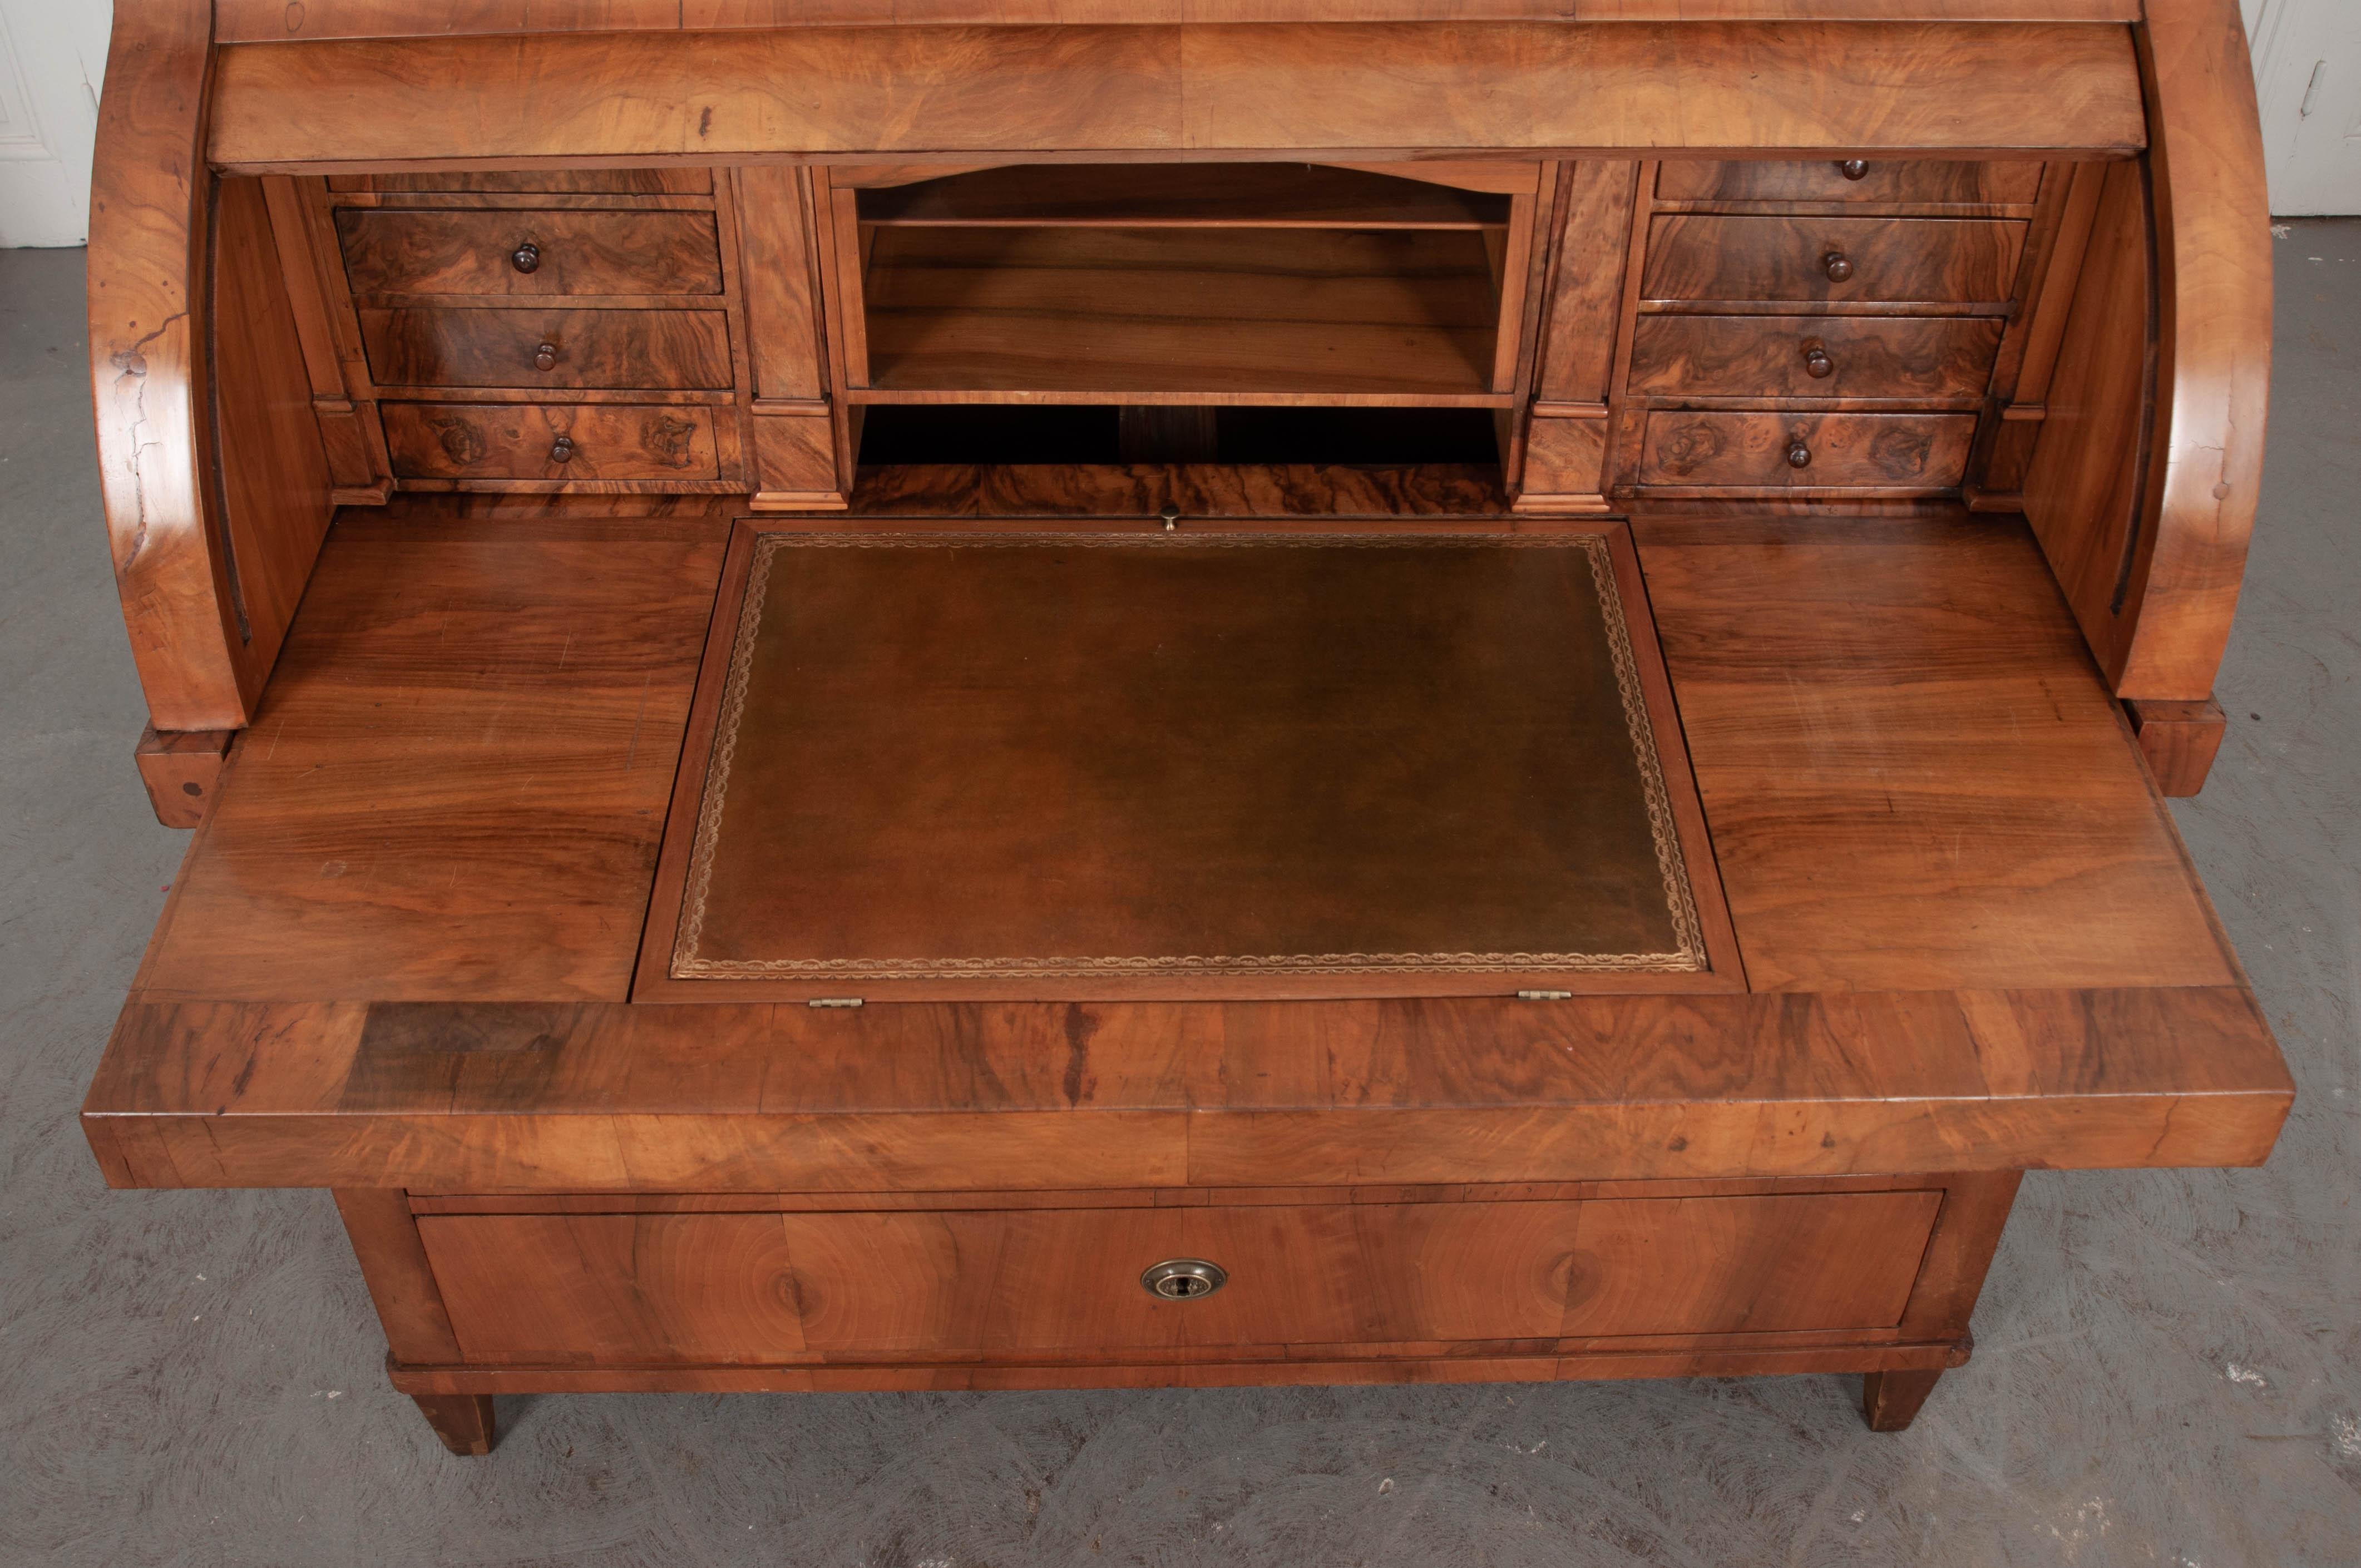 An impressive antique walnut desk, with roll top, from 19th century, France. This handsome desk showcases the ingenuity and creativity of many 19th century furniture makers. It has many mechanical features that are seldom seen in antiquity. Using